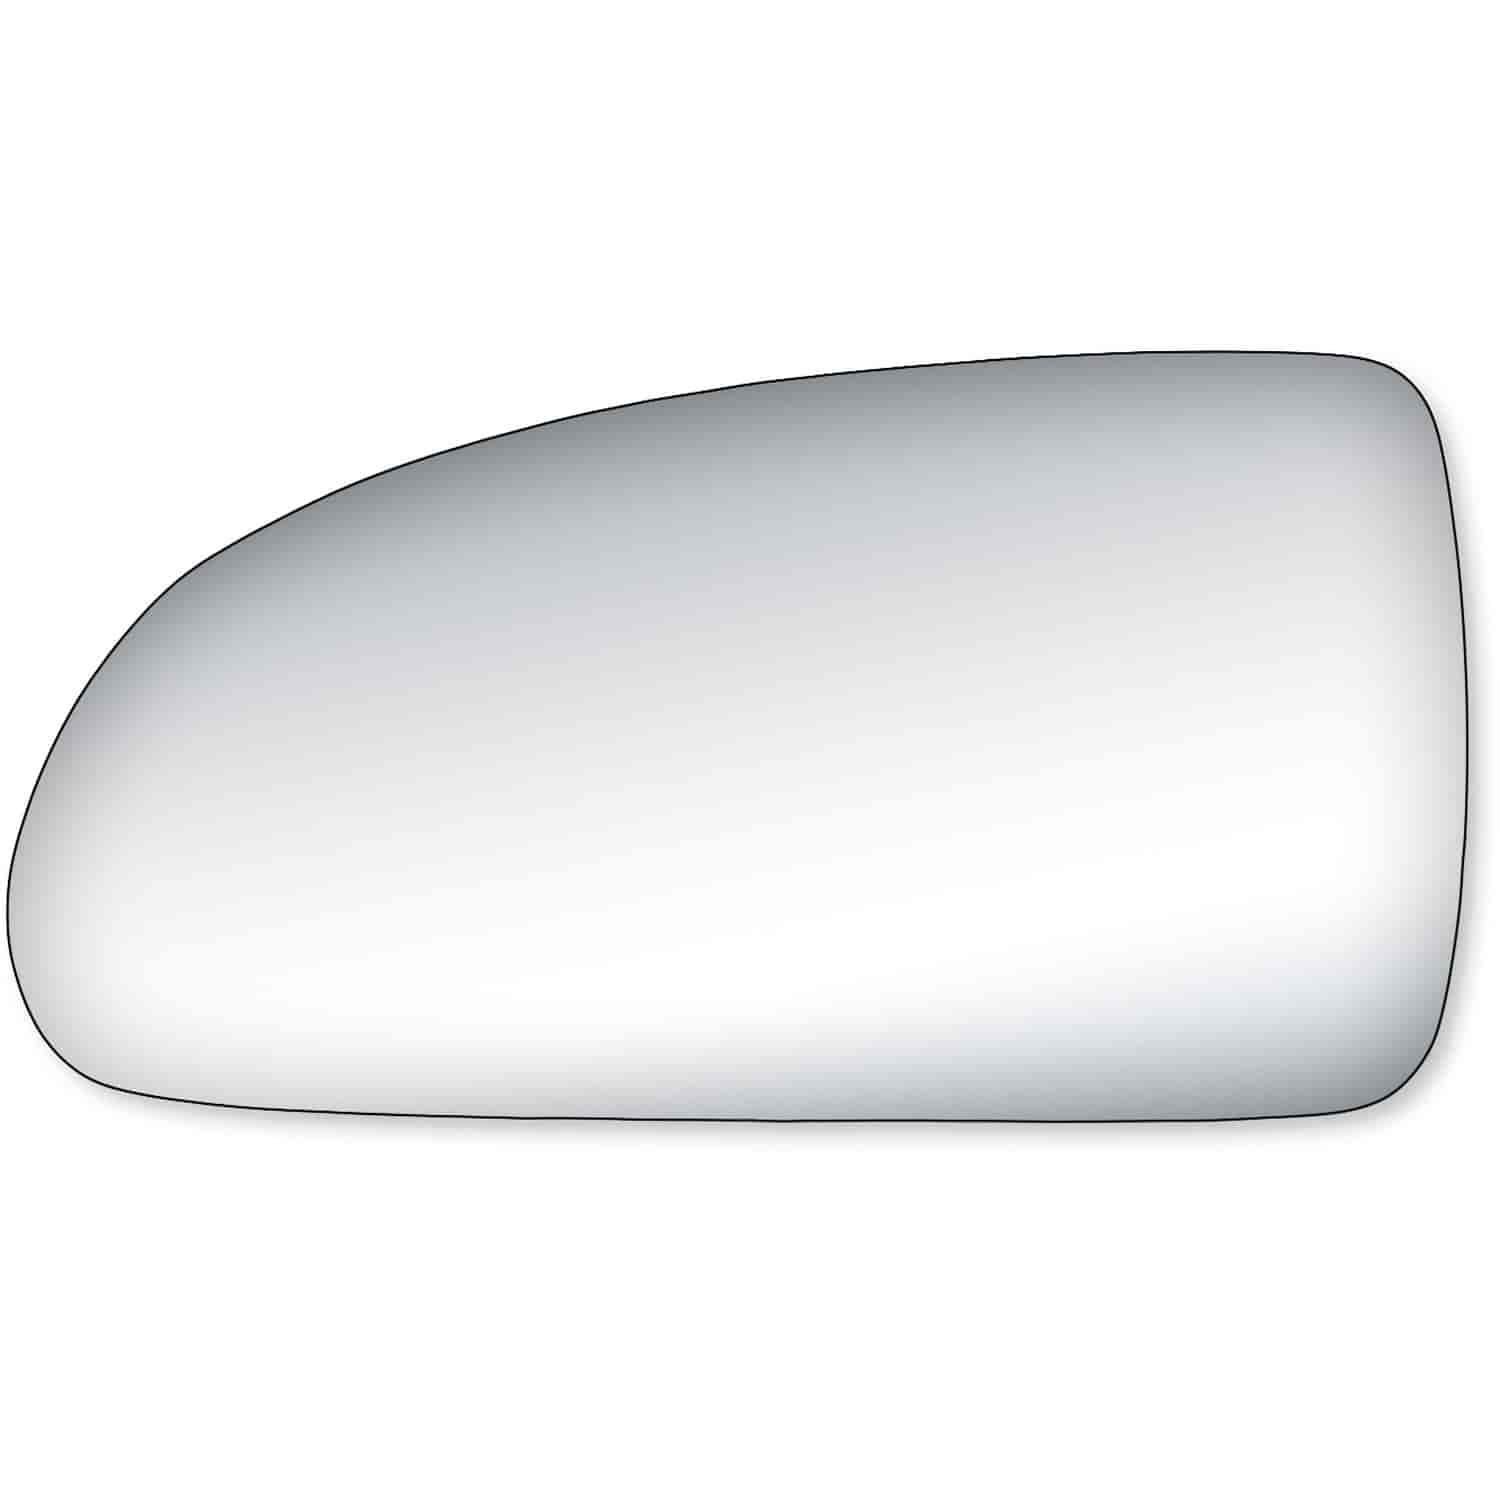 Replacement Glass for 07-10 Elantra Sedan the glass measures 3 13/16 tall by 7 7/16 wide and 7 15/16